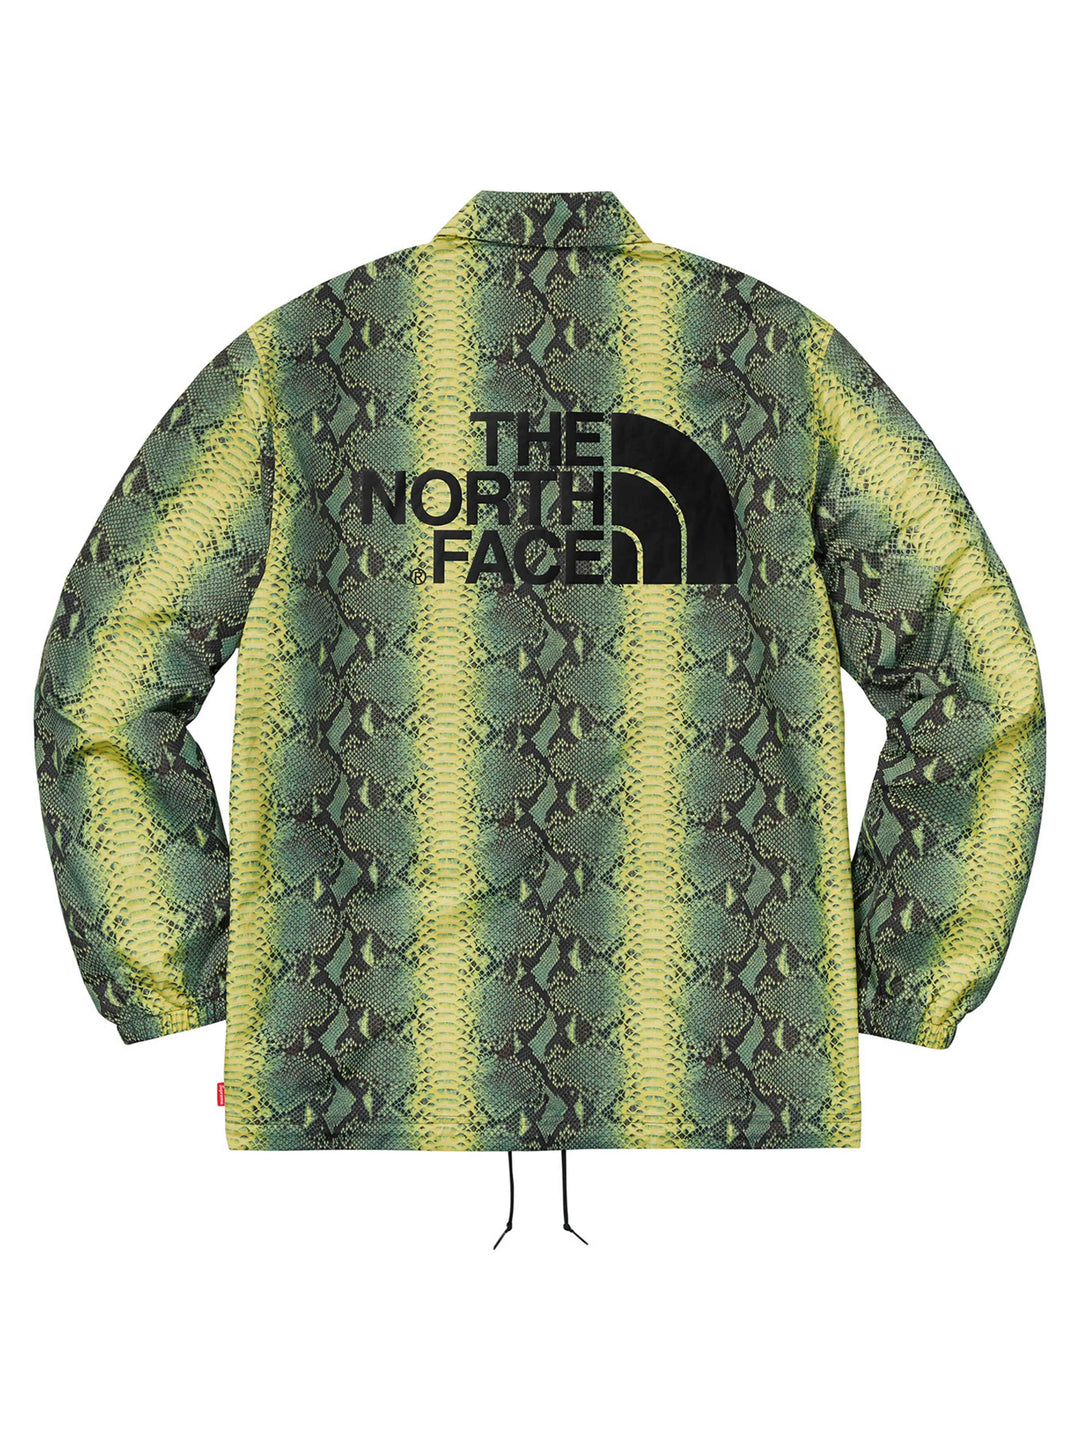 Supreme X The North Face Snakeskin Coaches Jacket L Supreme